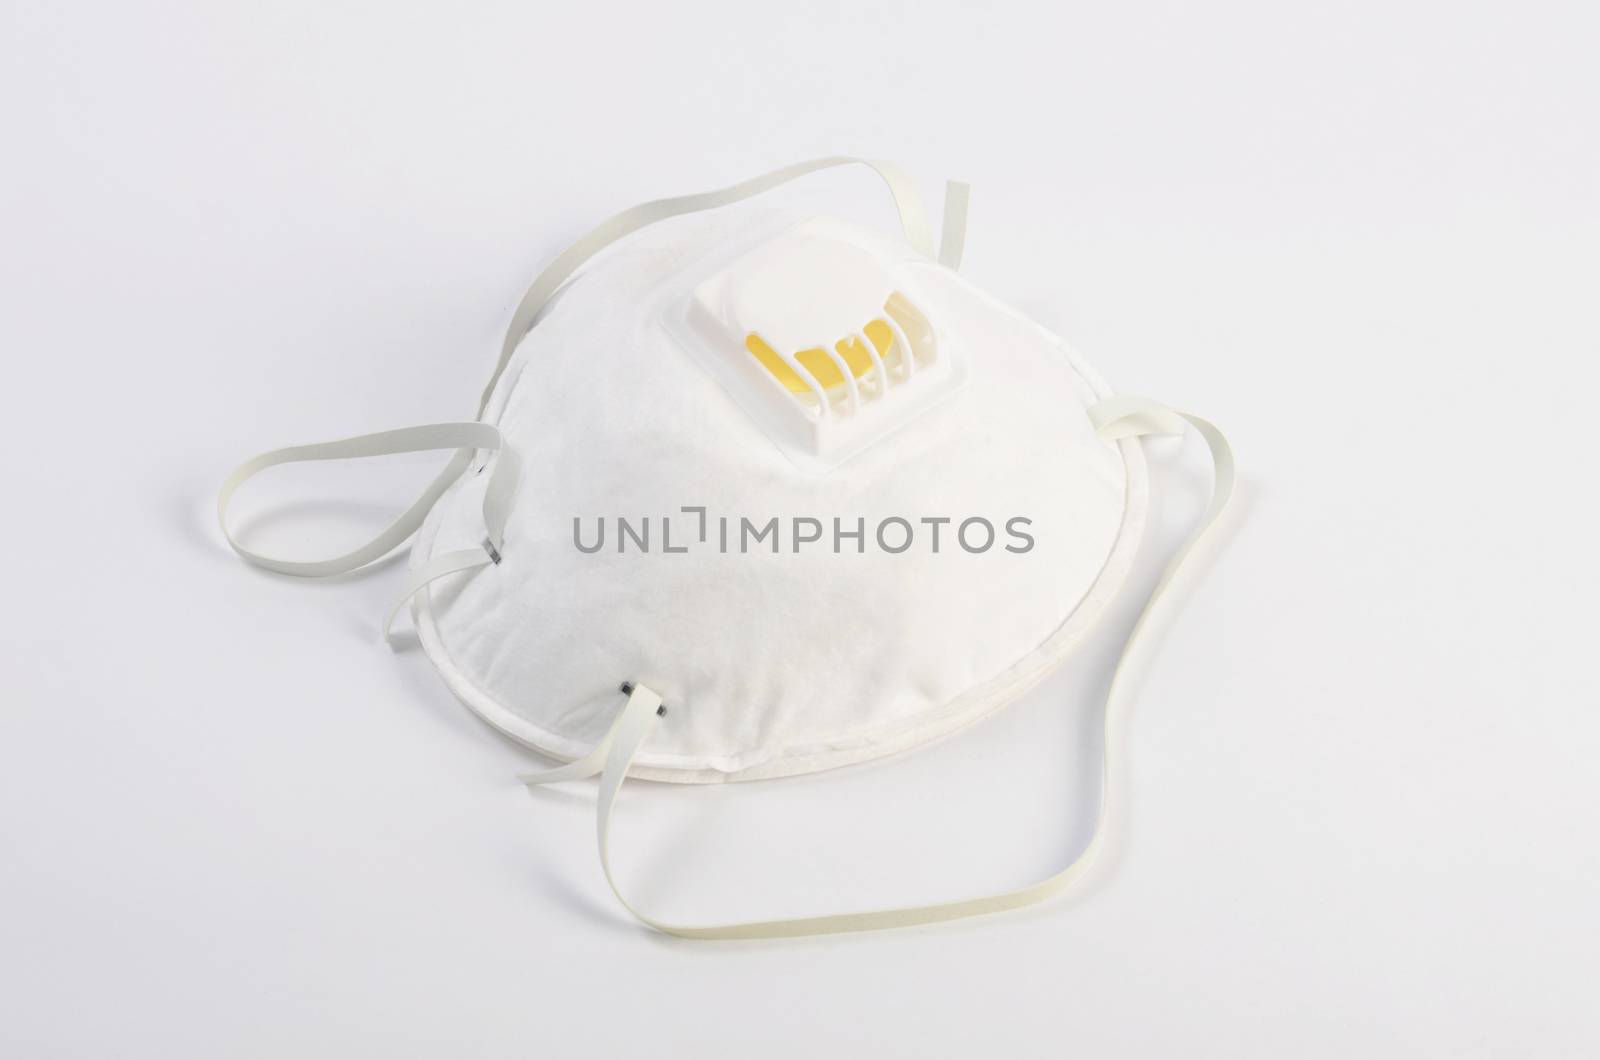 Protective mask respirator with filter close up